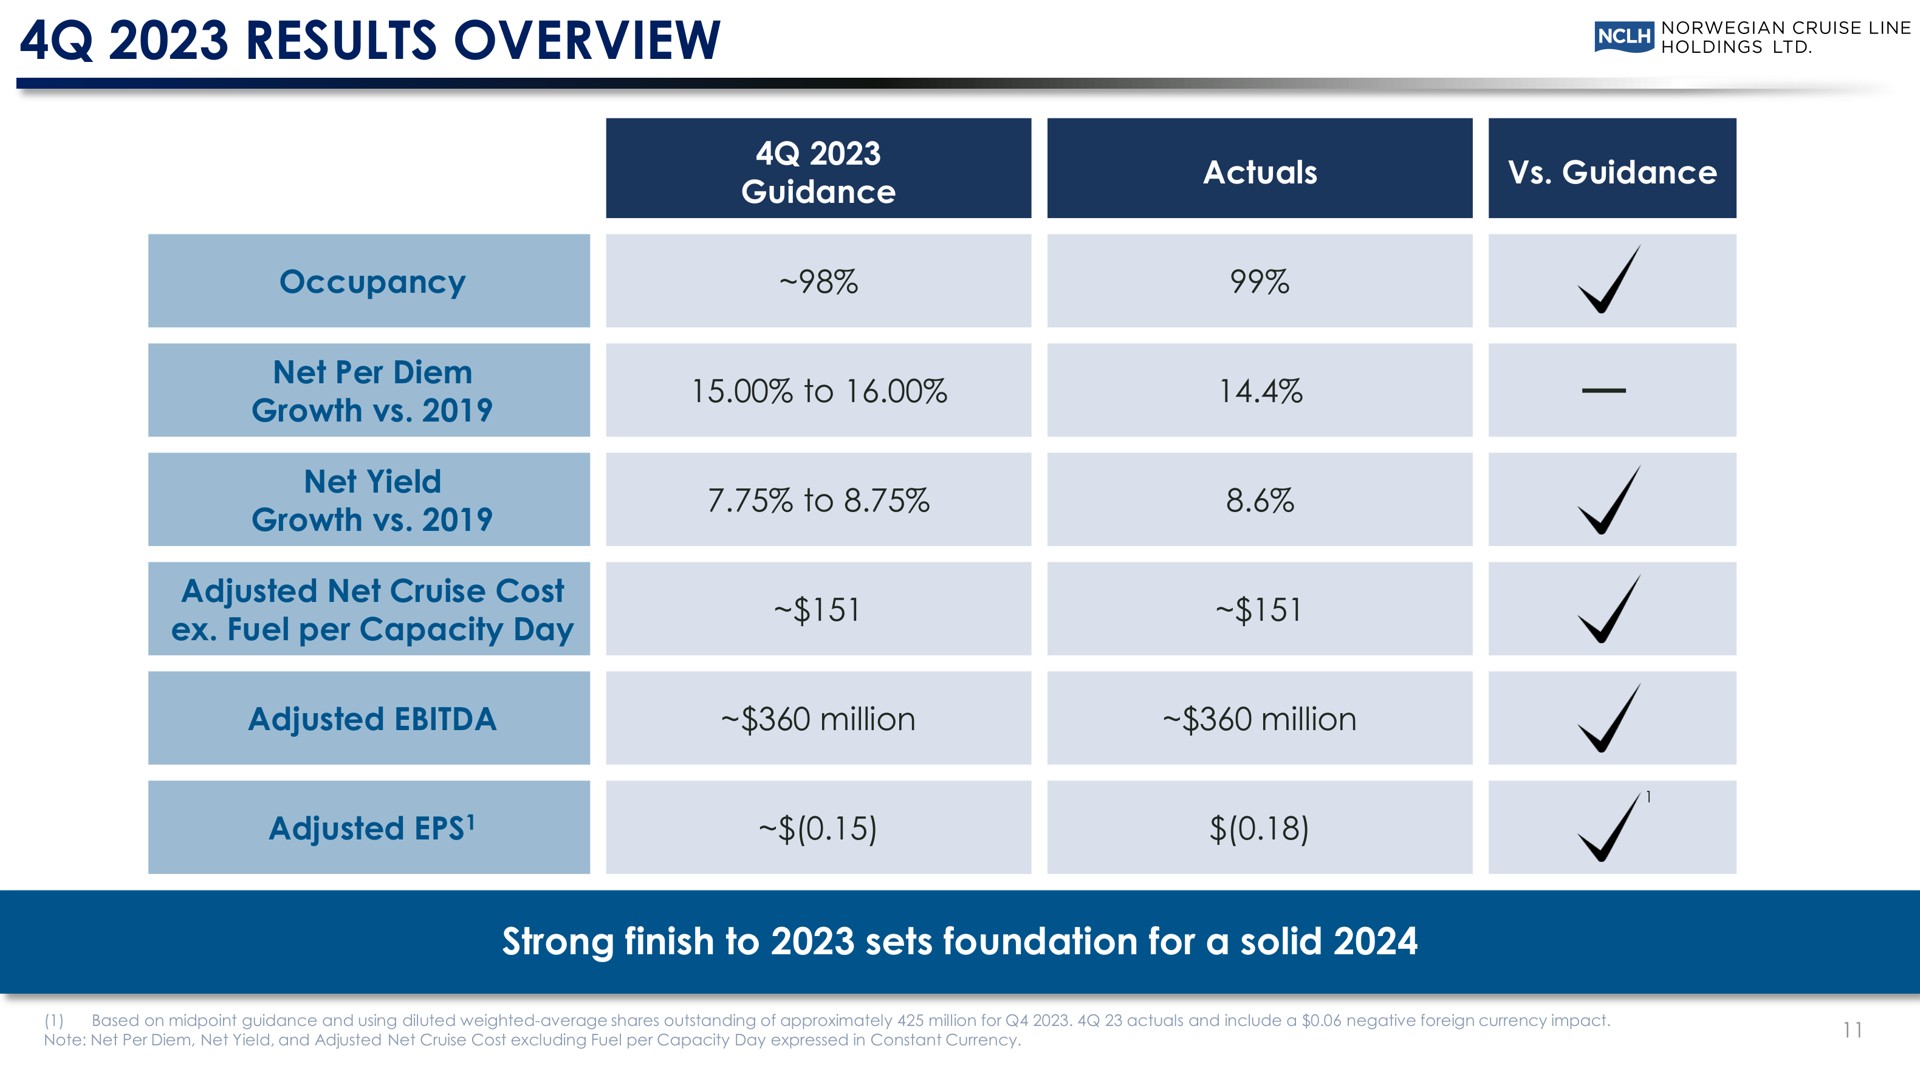 results overview strong finish to sets foundation for a solid | Norwegian Cruise Line